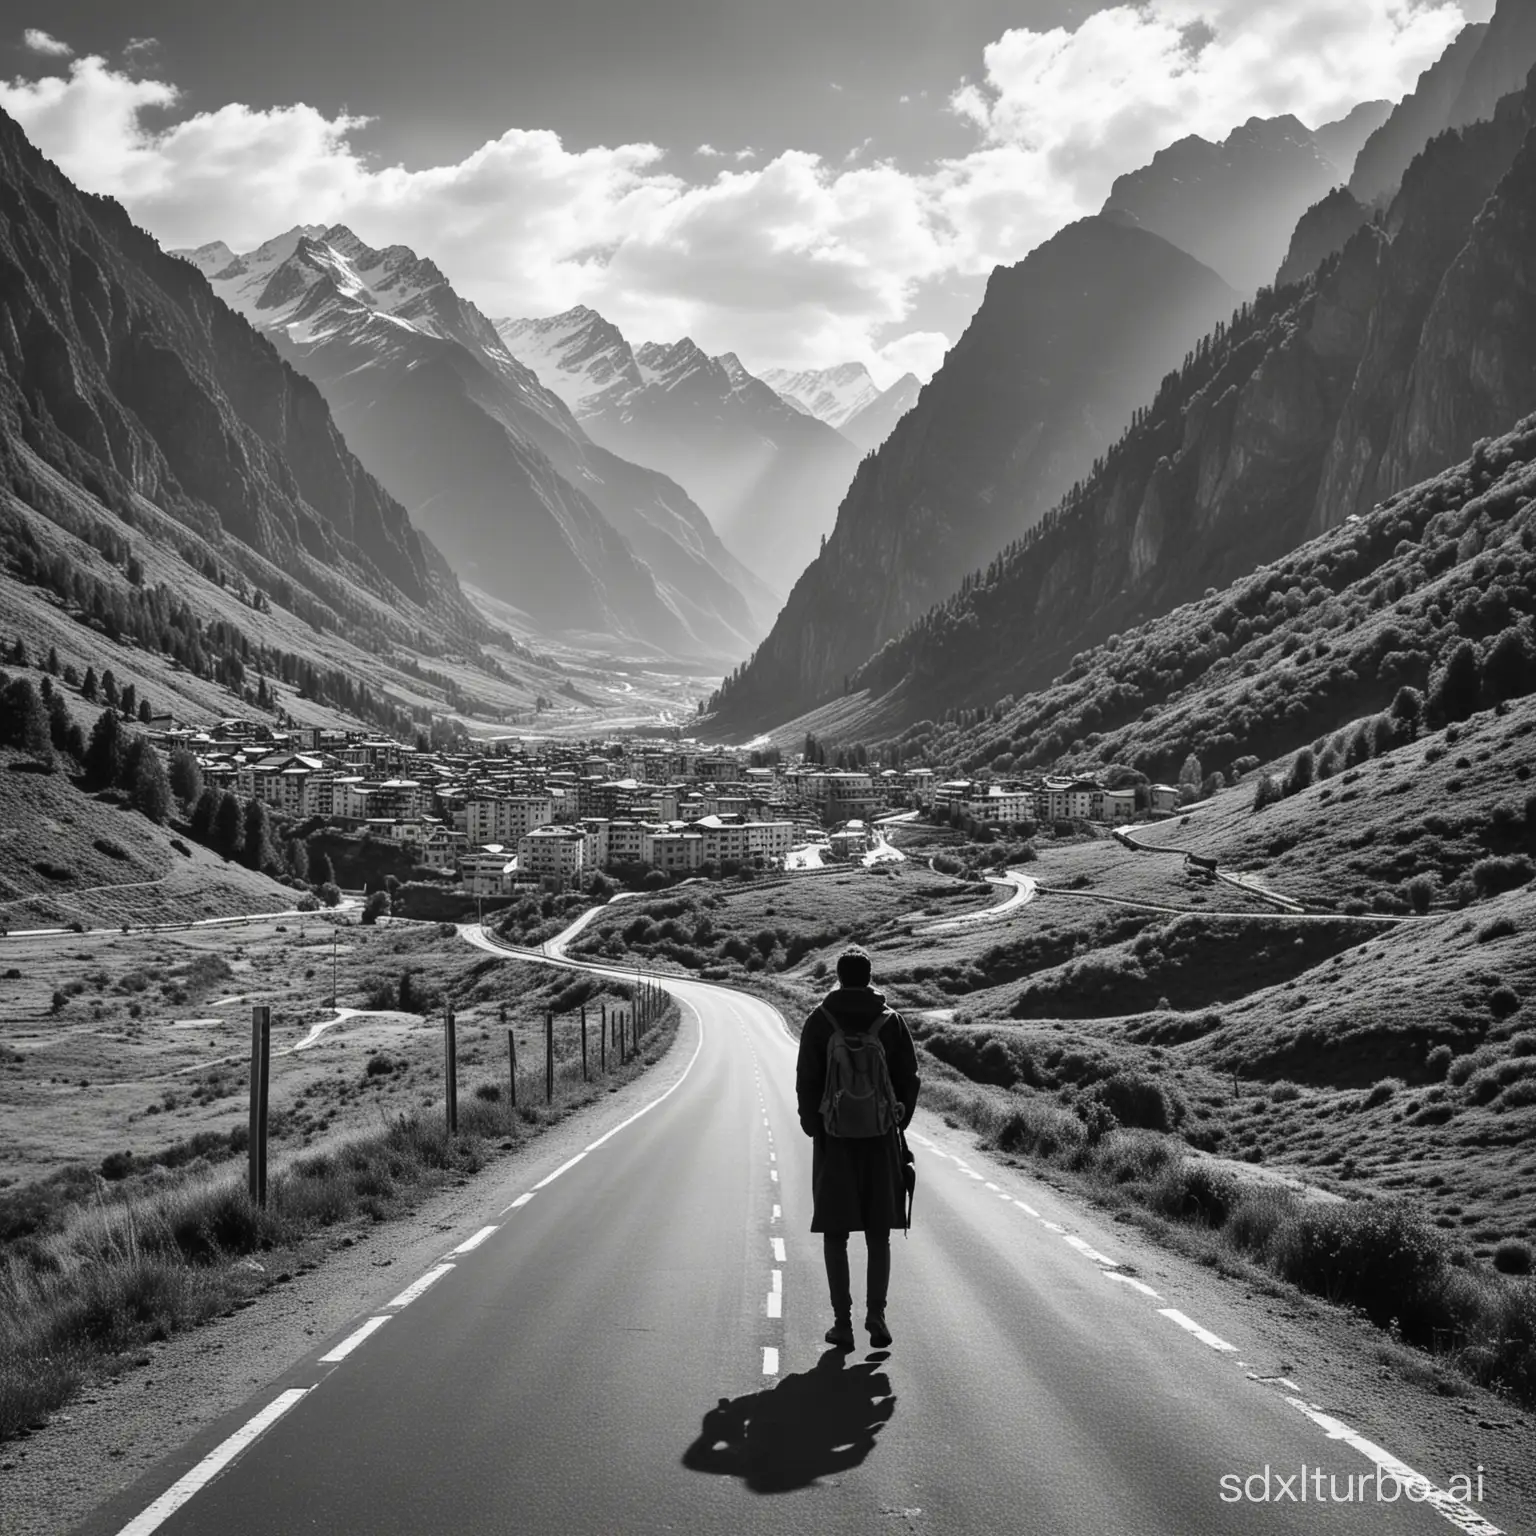 B&W photo of road with a traveller and mountains on one side and city scape on other side